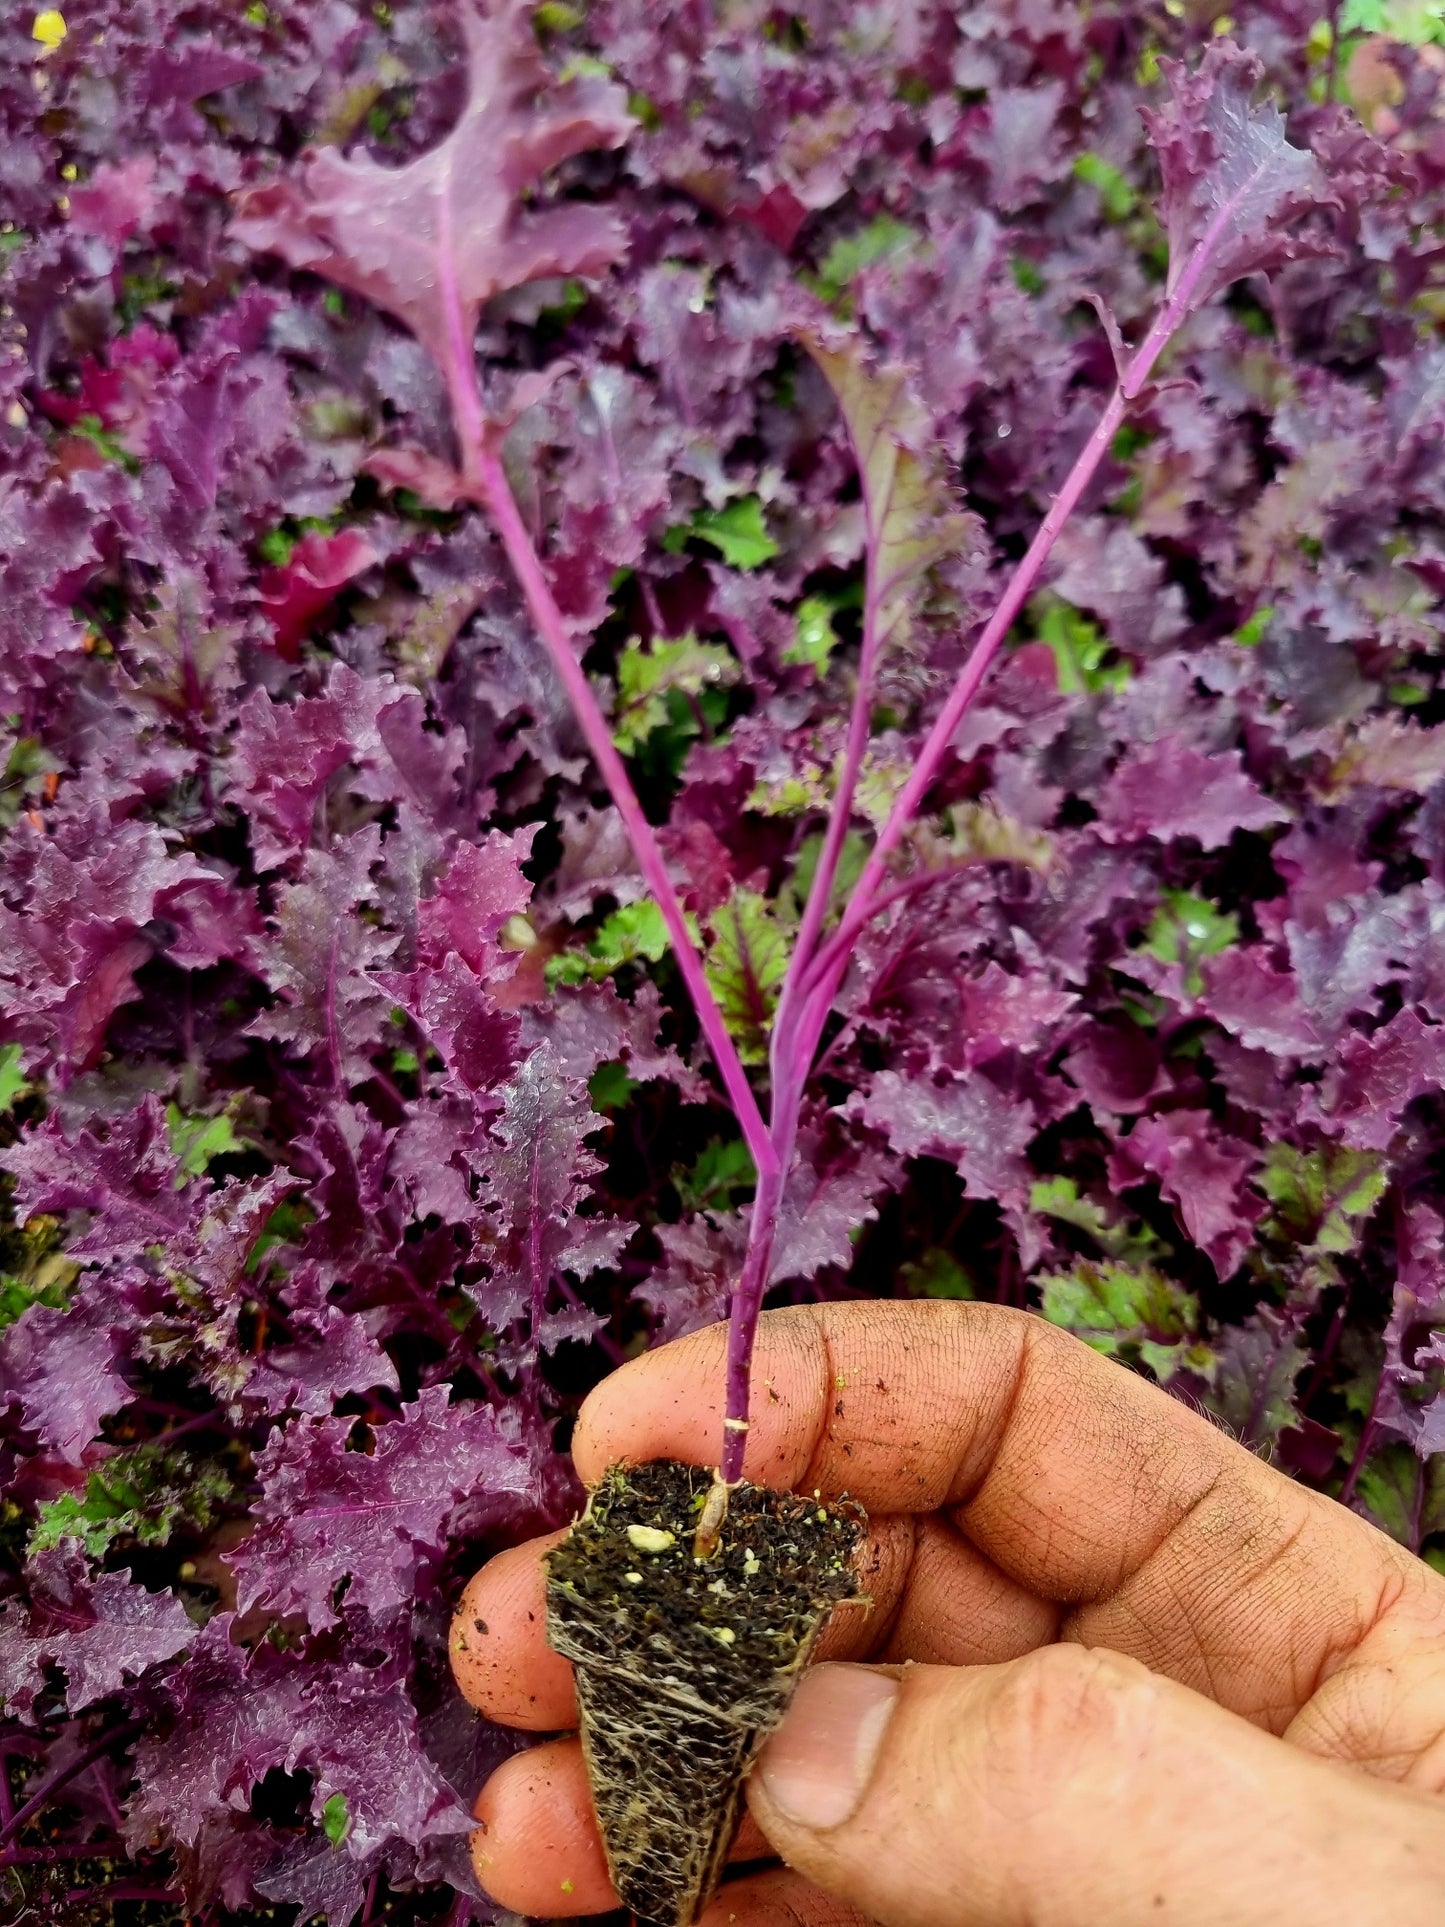 Kale Plug Plants MIXED PACK "Grow Your Own" Vegetables **Letterbox Friendly**